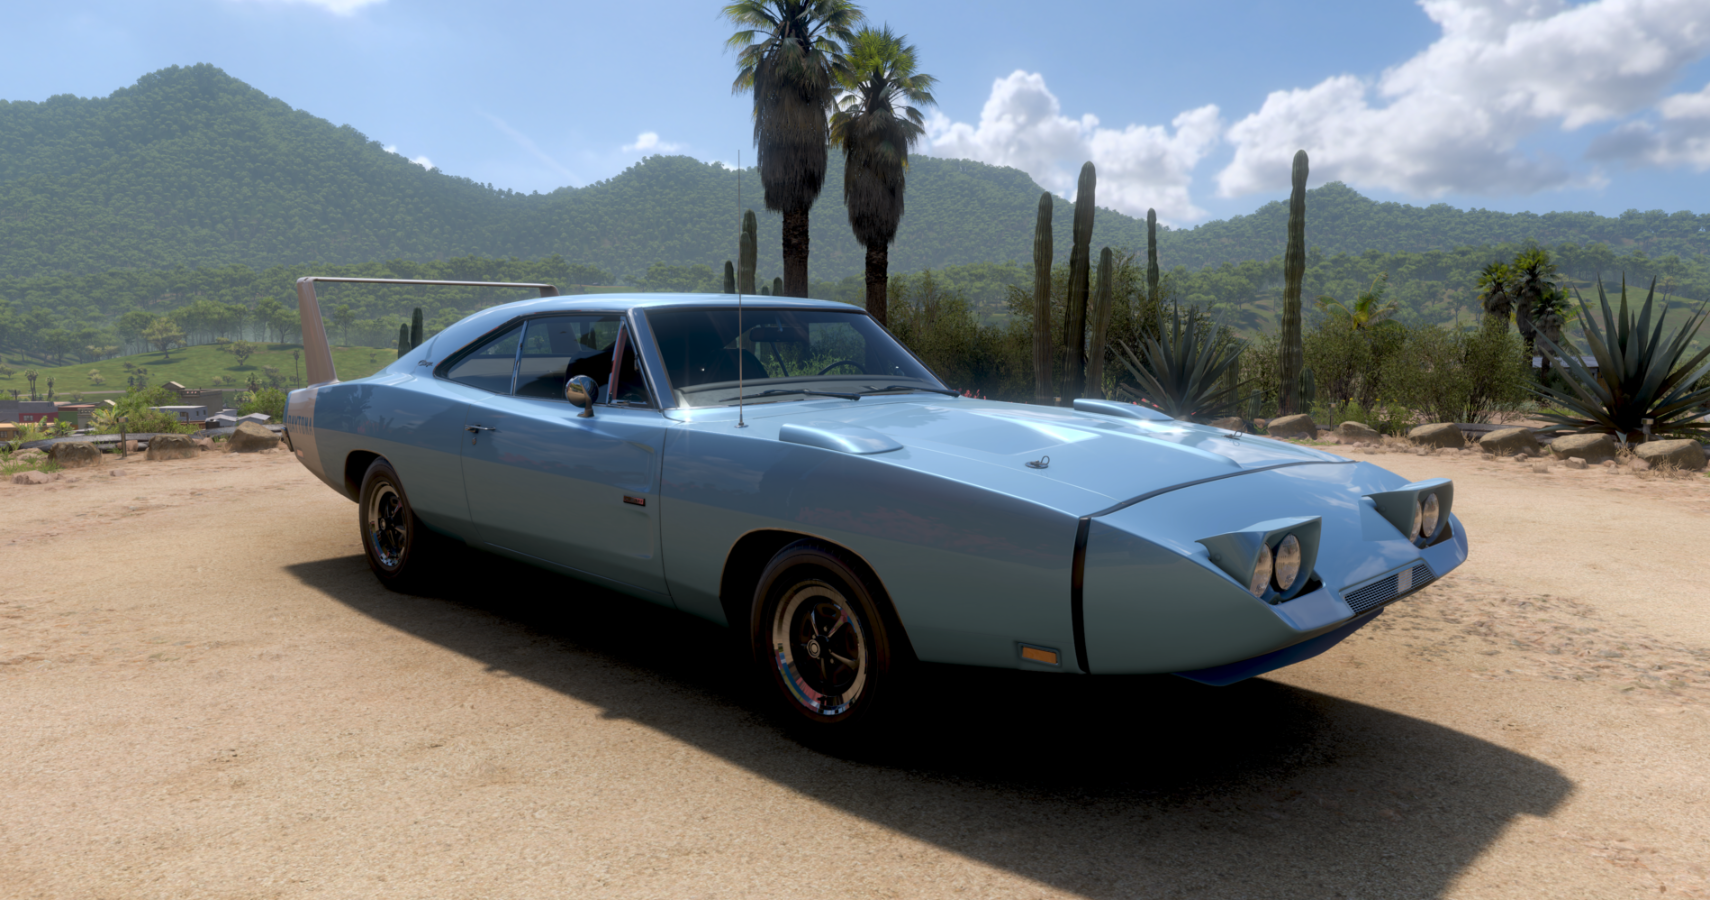 A blue 1969 Dodge Charger Daytona Hemi parked in FH5